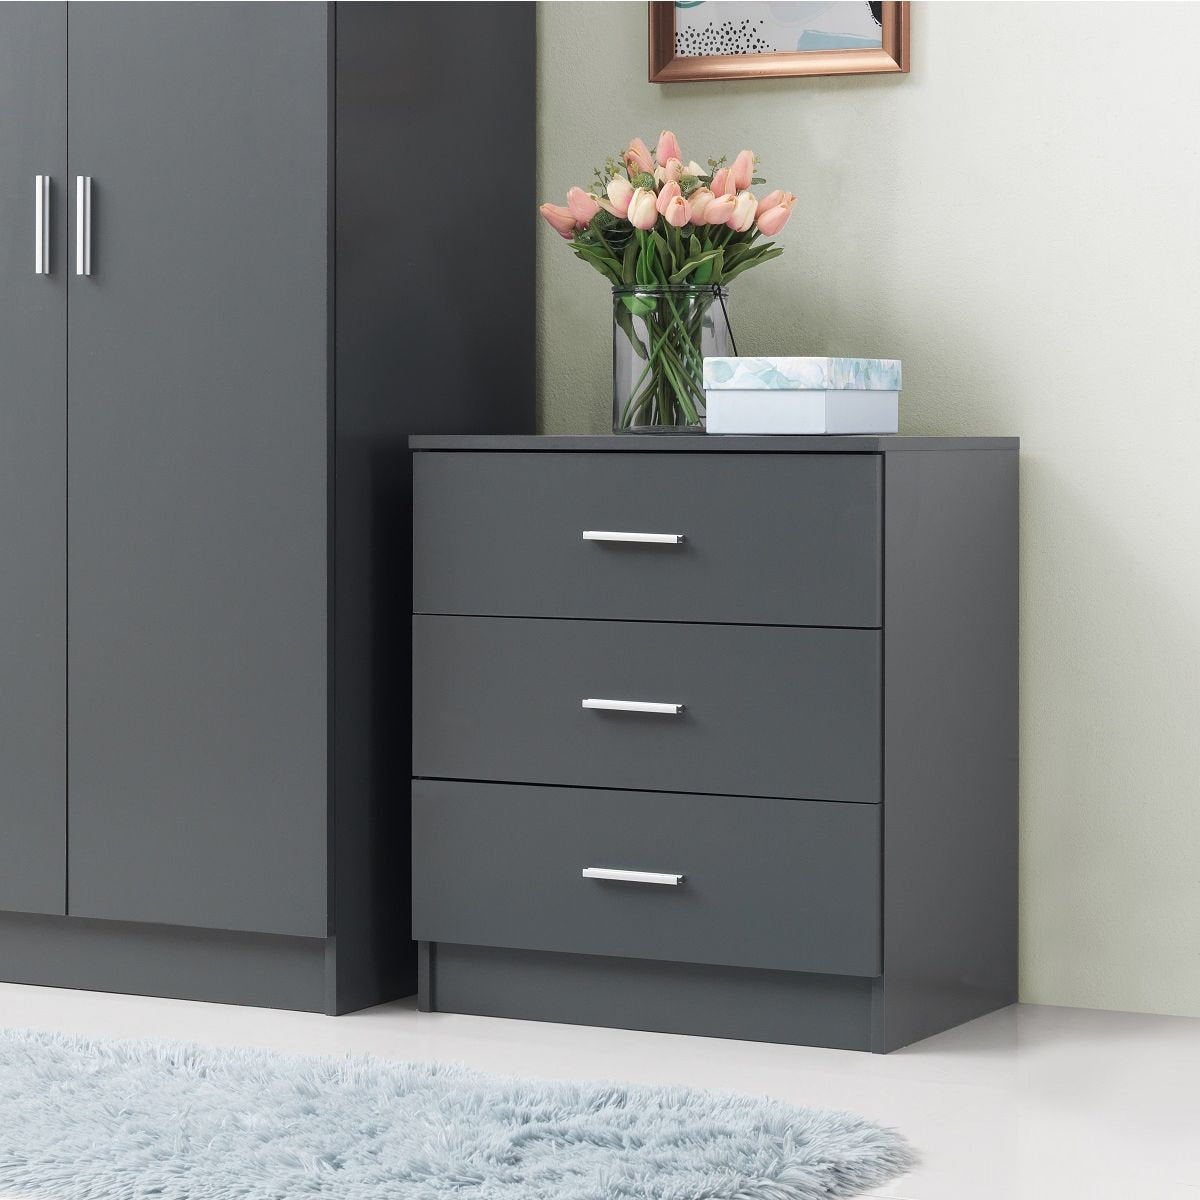 Staten Grey Bedroom Set Double Wardrobe, Chest of Drawers and Bedside Table